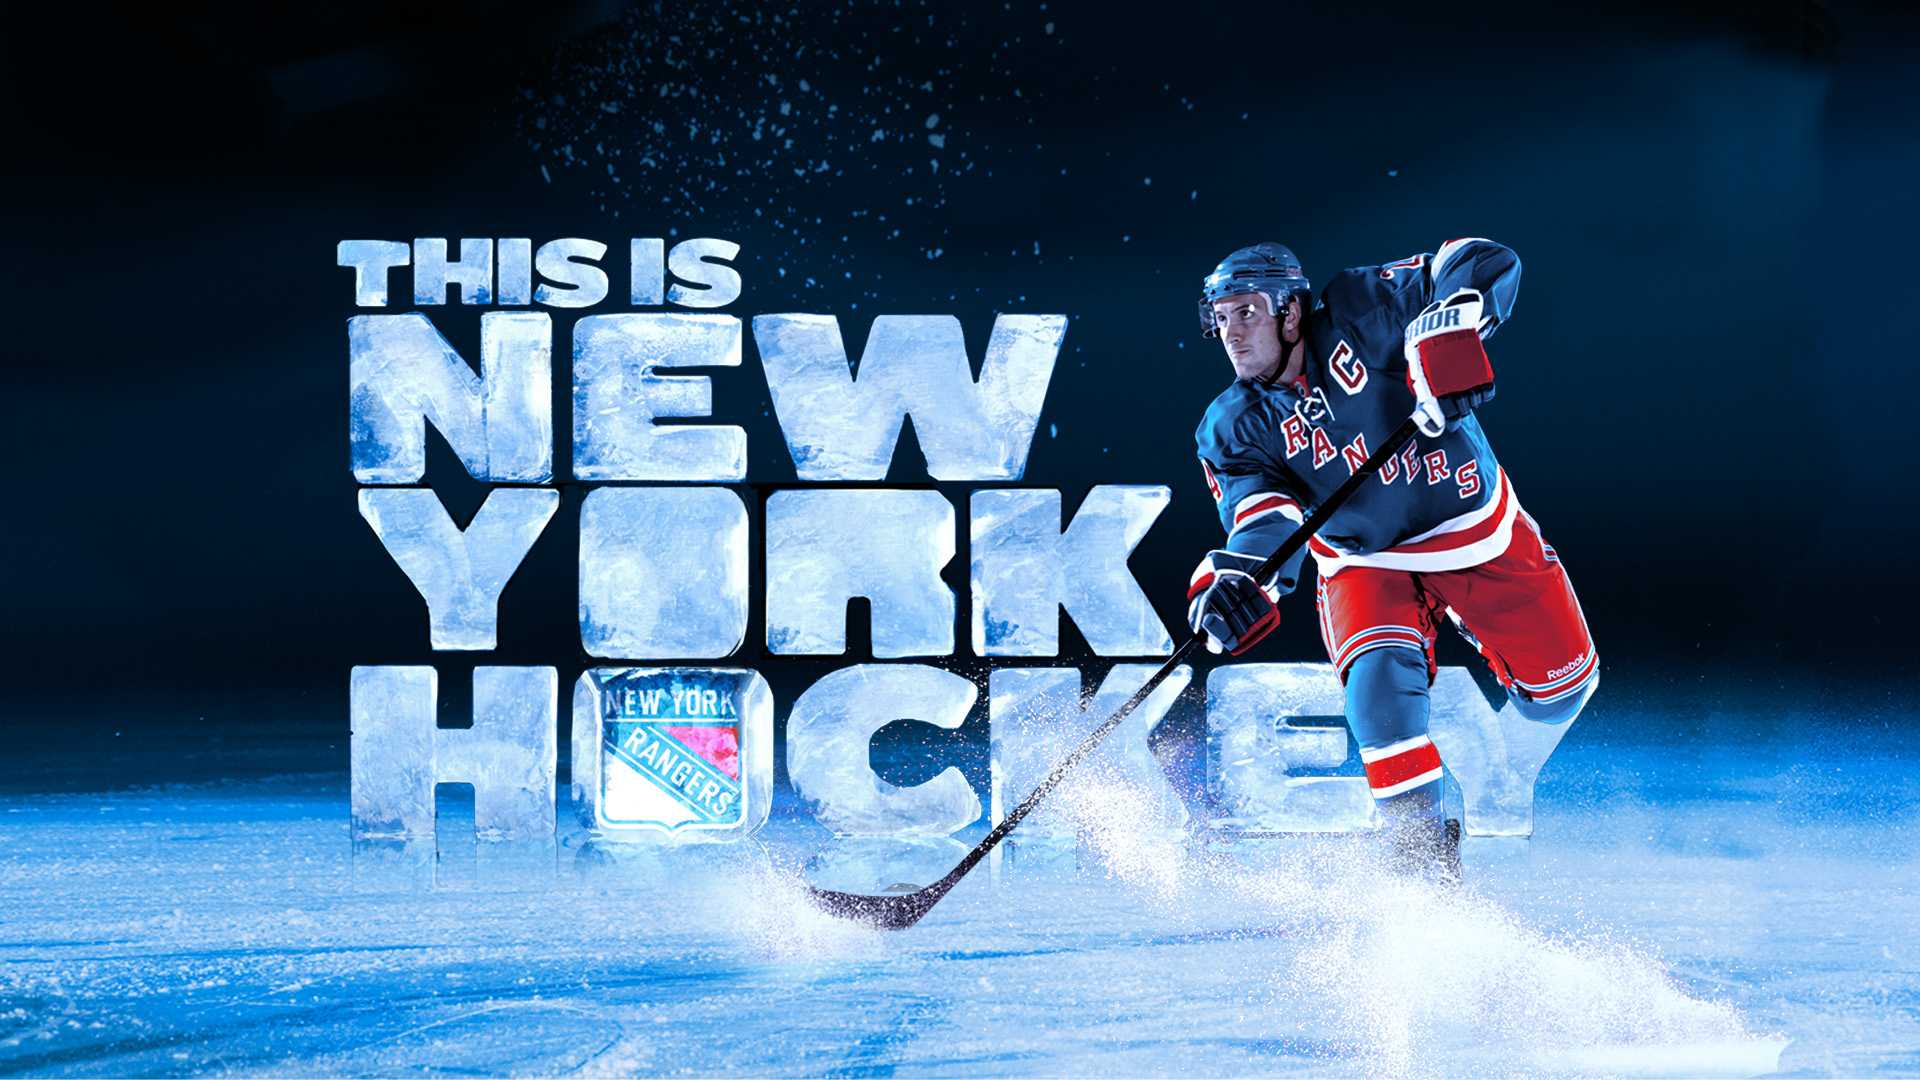 Ny Rangers Wallpaper High Quality HD New York For Mobile Phones Nhl